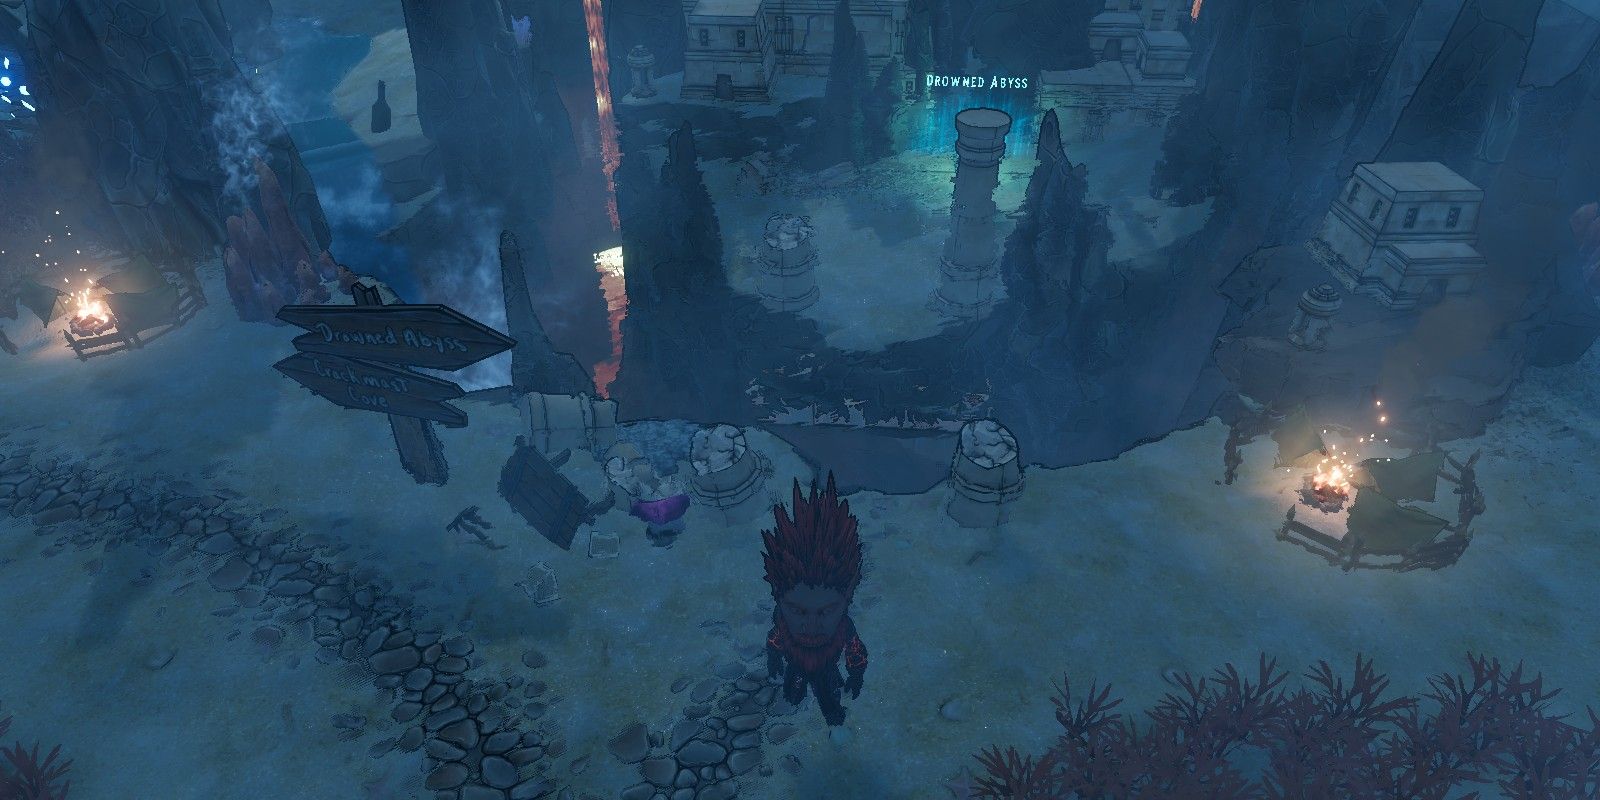 Tiny Tina's Wonderlands Invisible Bridge Near The Drowned Abyss